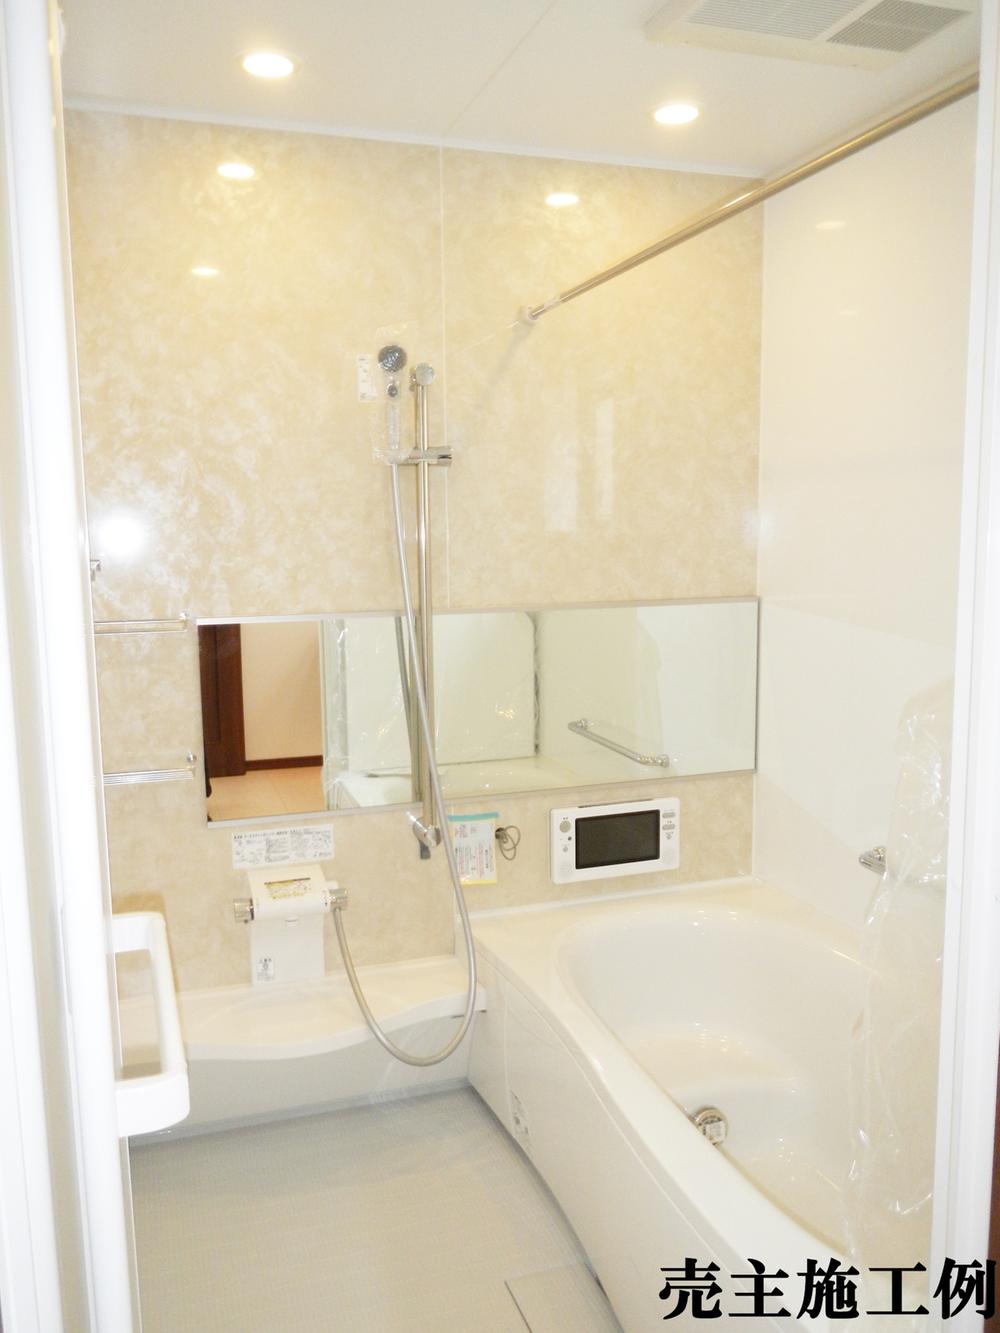 Bathroom. Since also attached bathroom ventilation dryer will not dry out even laundry on a rainy day! Slowly it bath time because it also attached bathroom digital TV you can enjoy